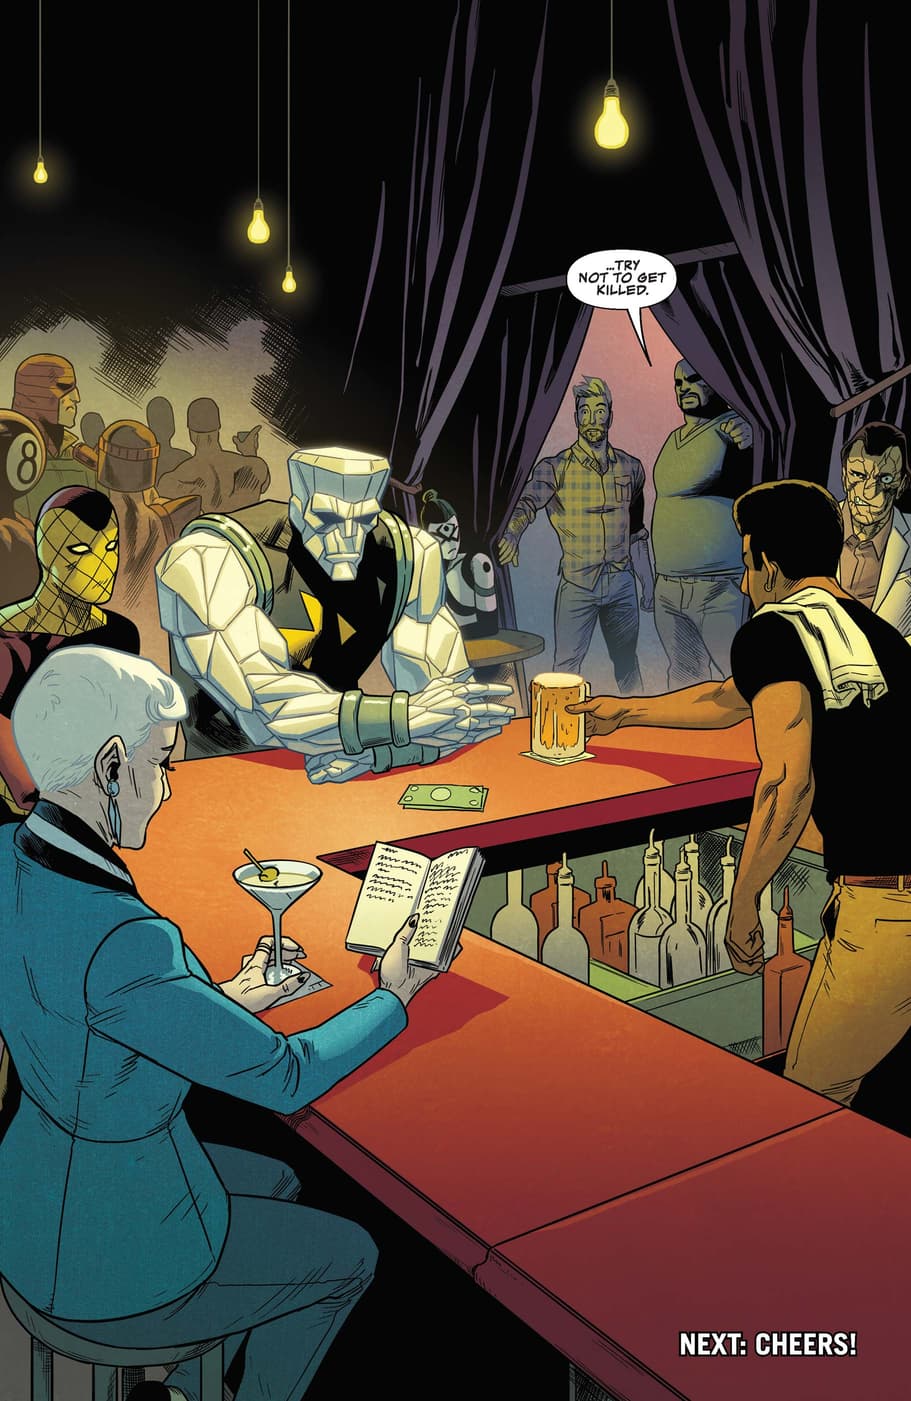 STAR-LORD (2016) #2 The Bar With No Name by Chip Zdarsky and Kris Anka